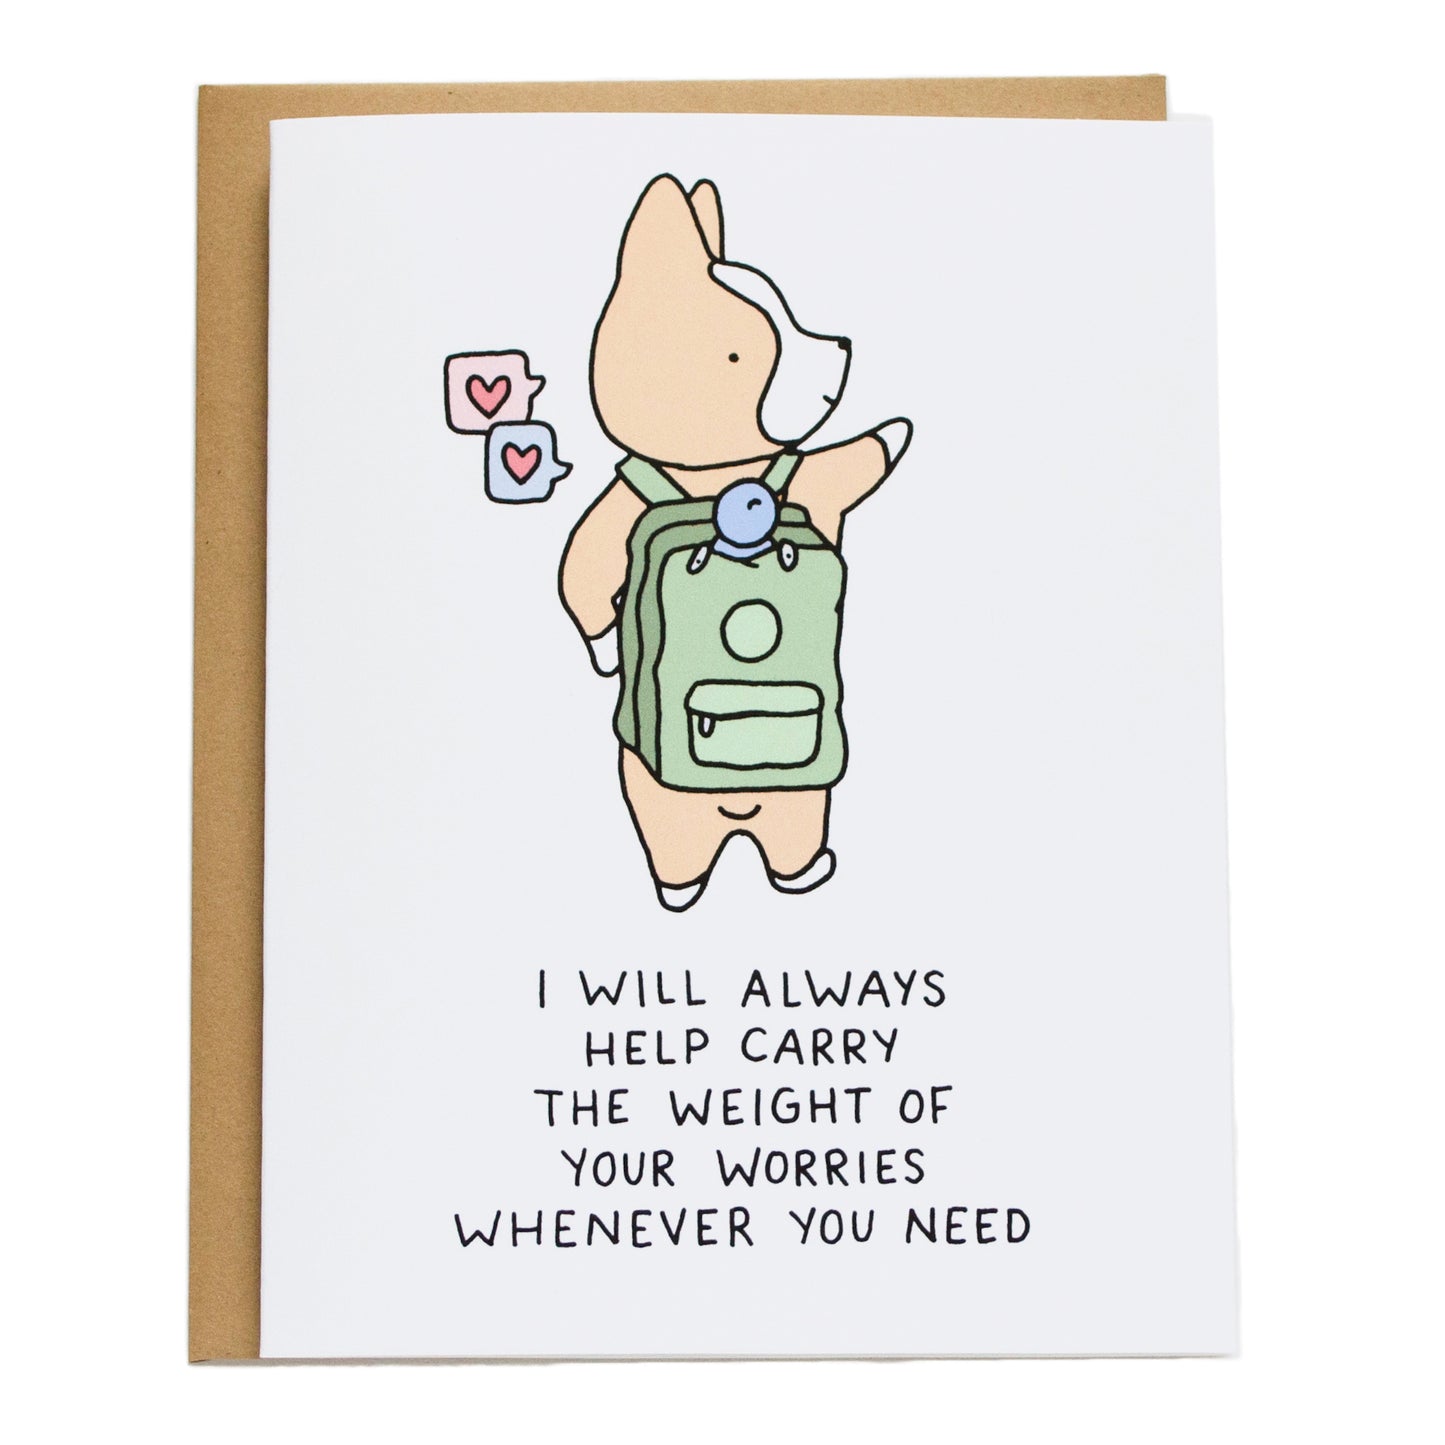 corgi carrying blue bird in backpack and card reads I will always help carry the weight of your worries whenever you need